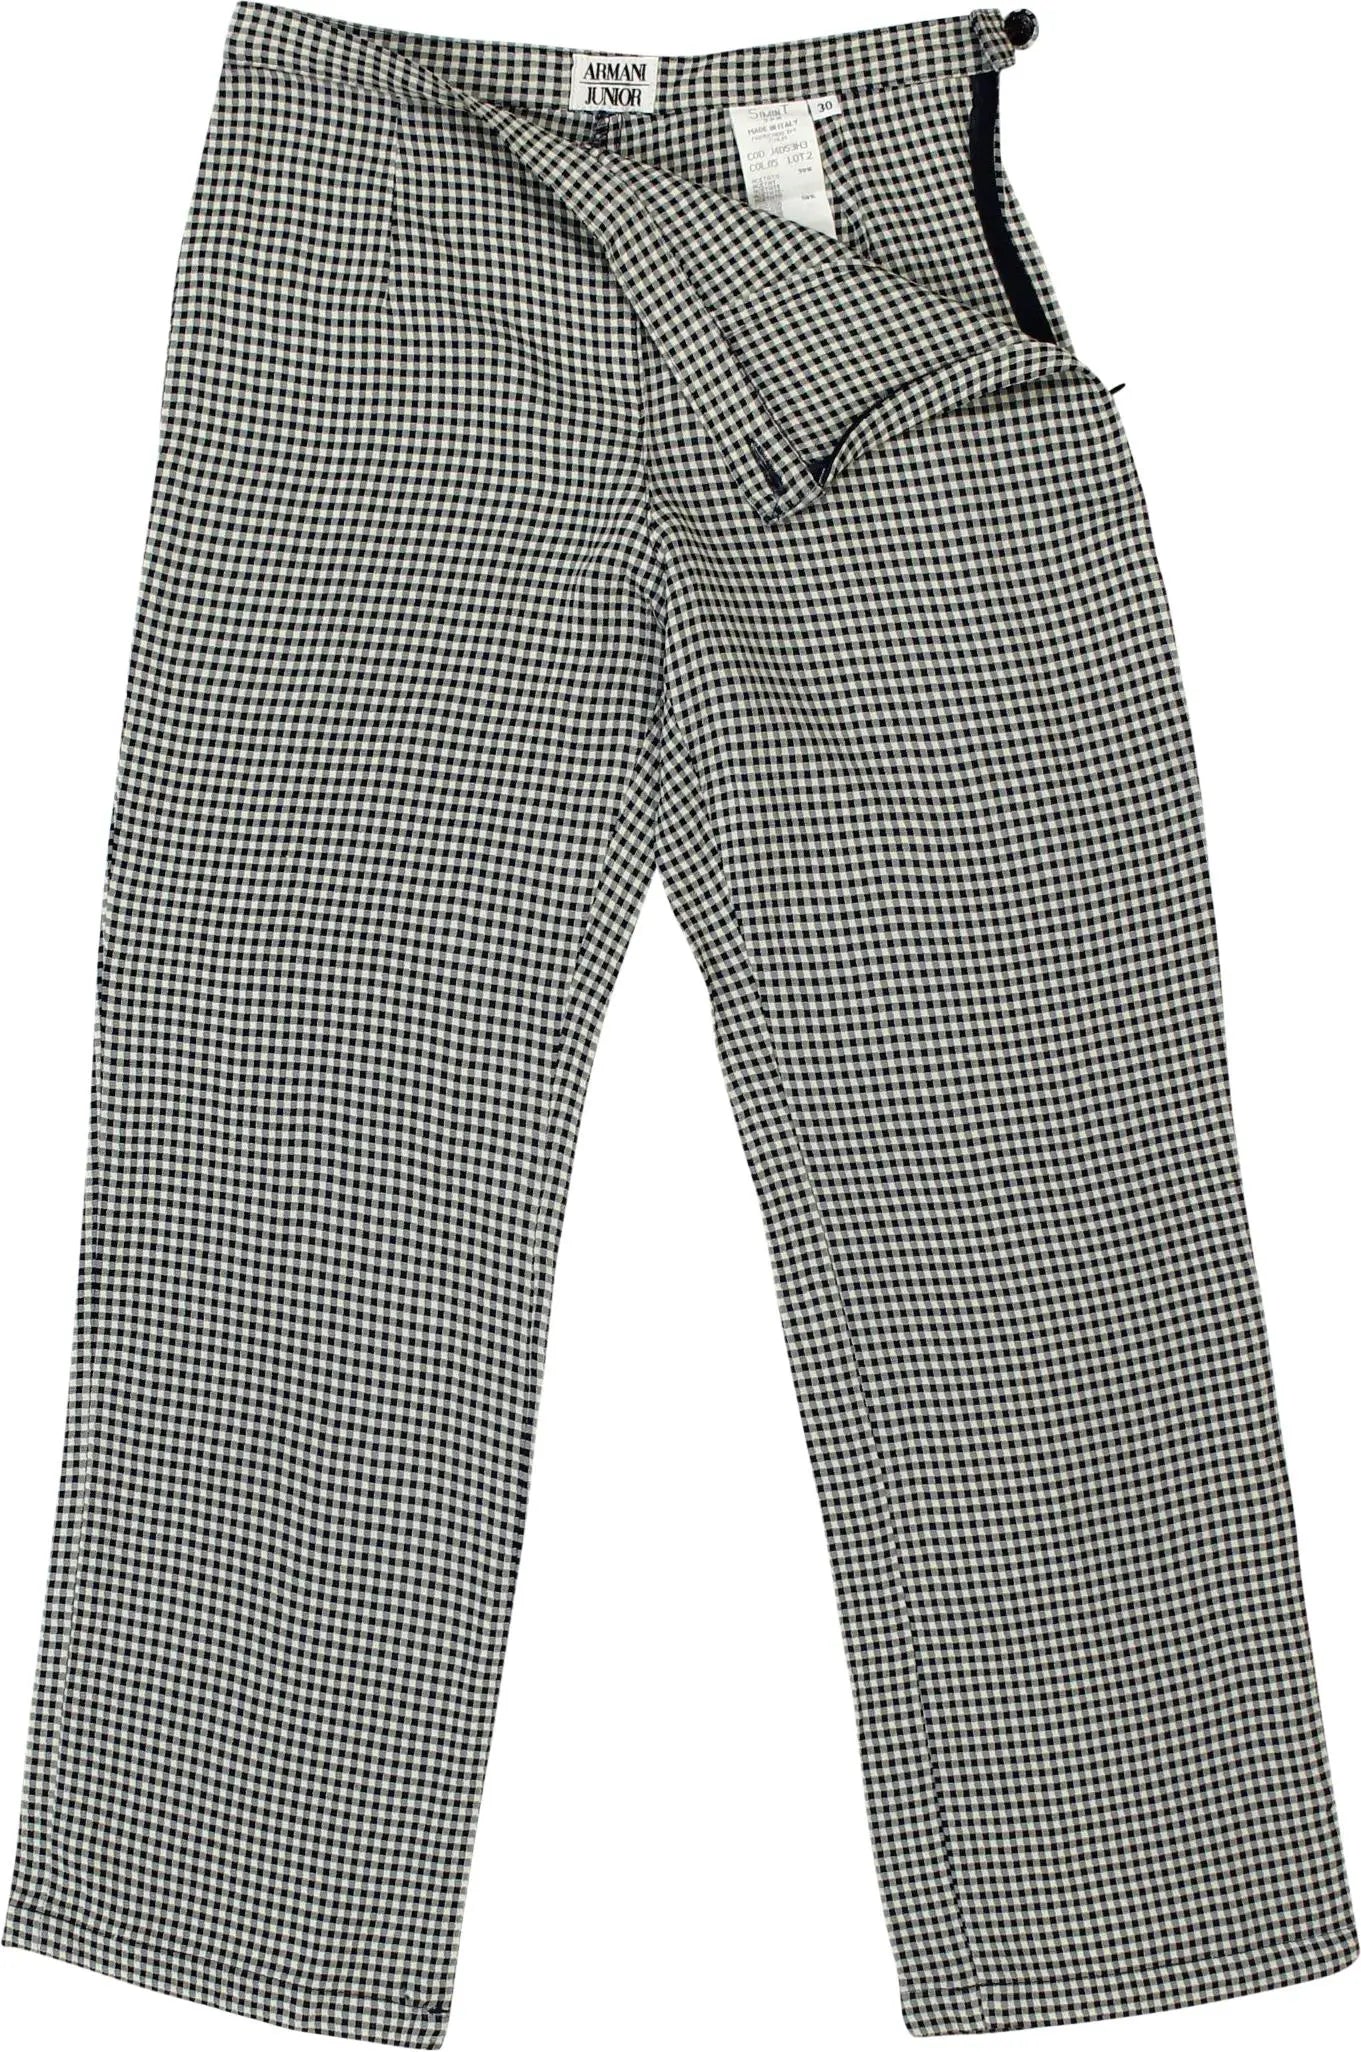 Armani Junior - Checked Trousers by Armani- ThriftTale.com - Vintage and second handclothing